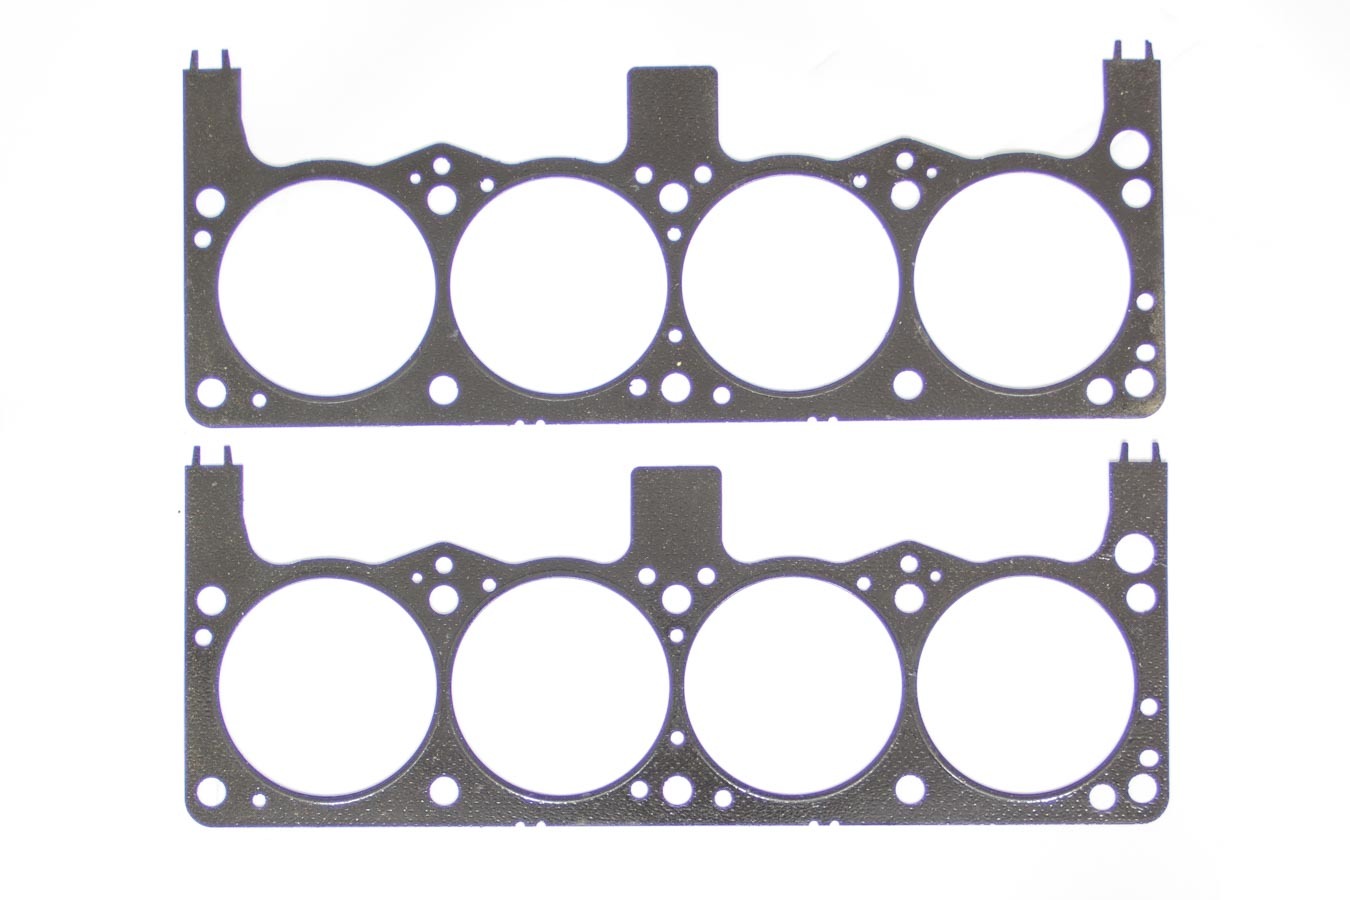 Mopar Performance P4120094 Cylinder Head Gasket, 4.125 in Bore, 0.024 in Compression Thickness, Steel Core Laminate, Small Block Mopar, Pair